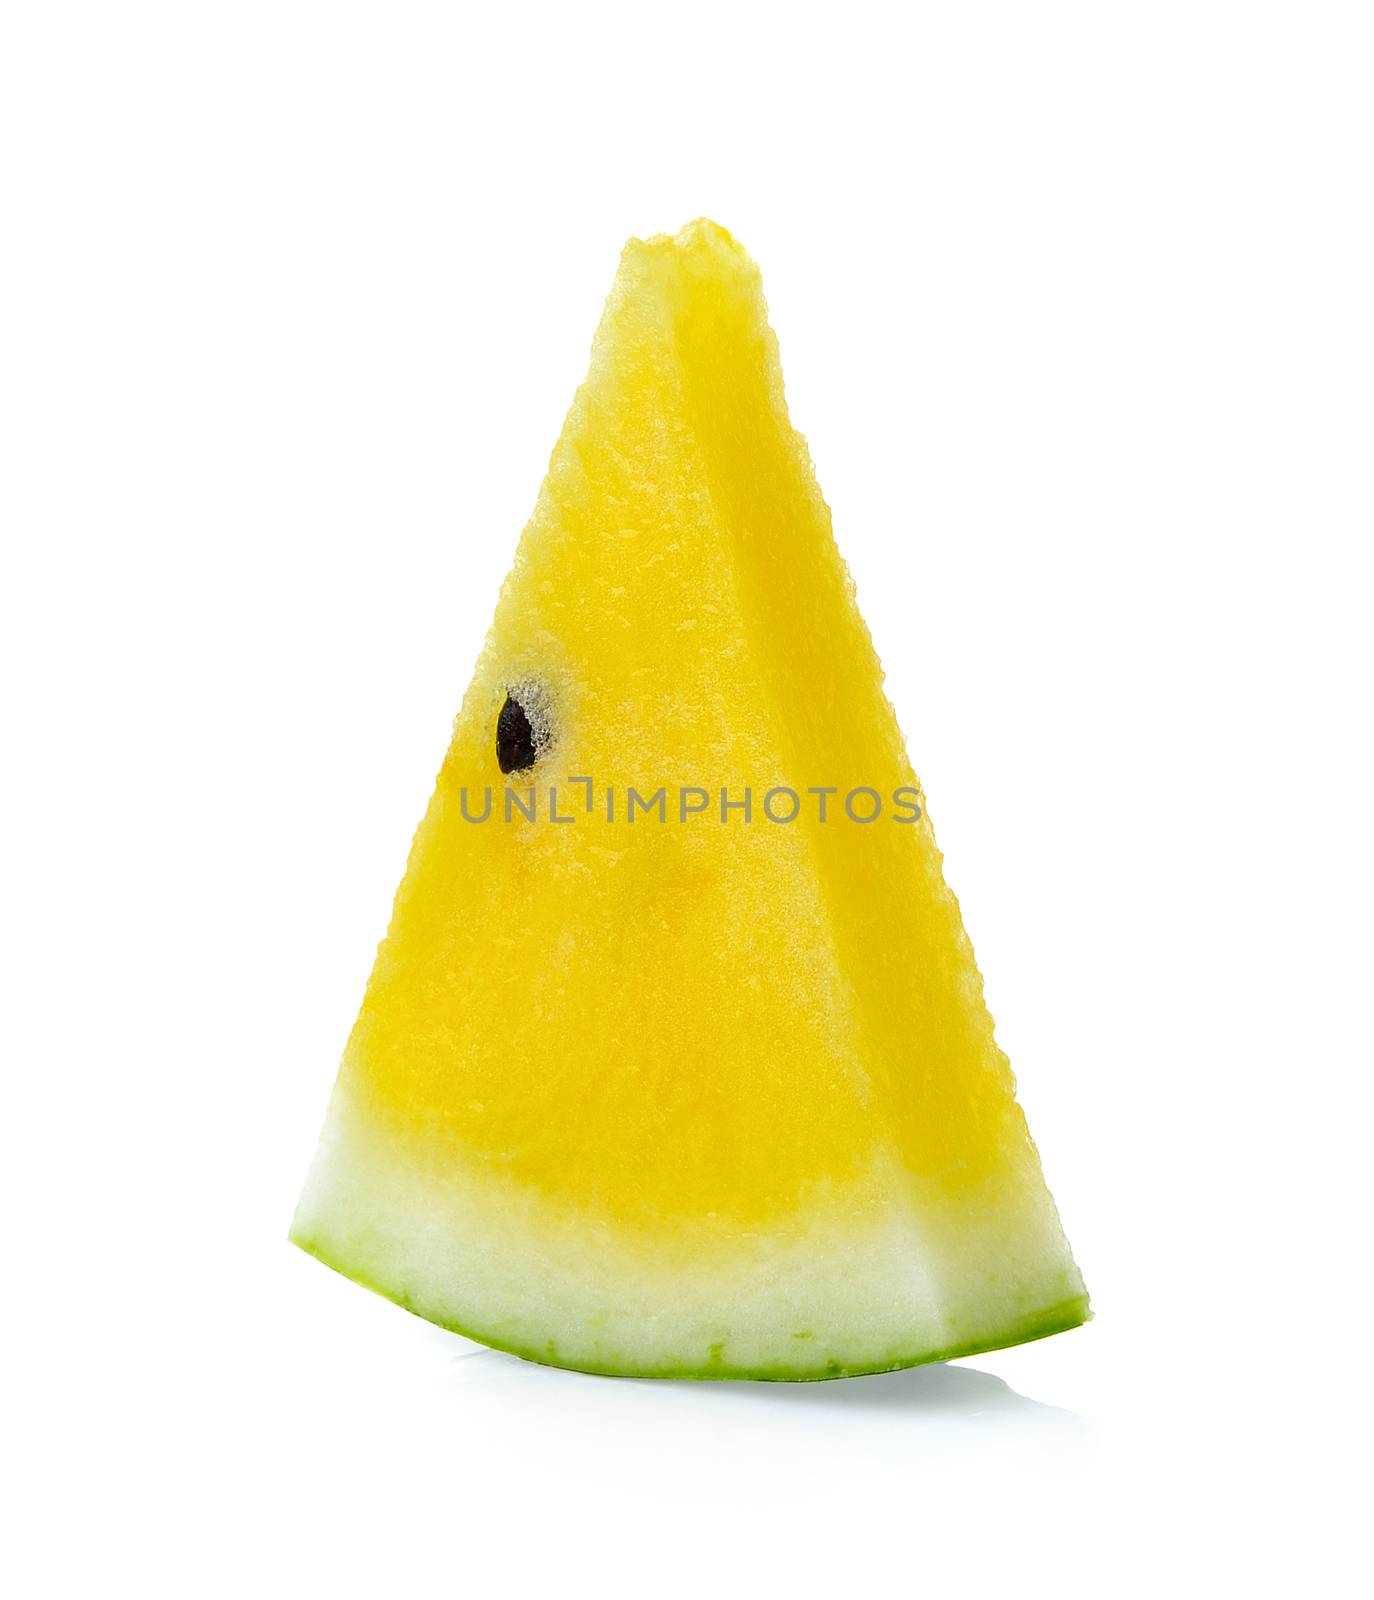 watermelon slice on white background by sommai